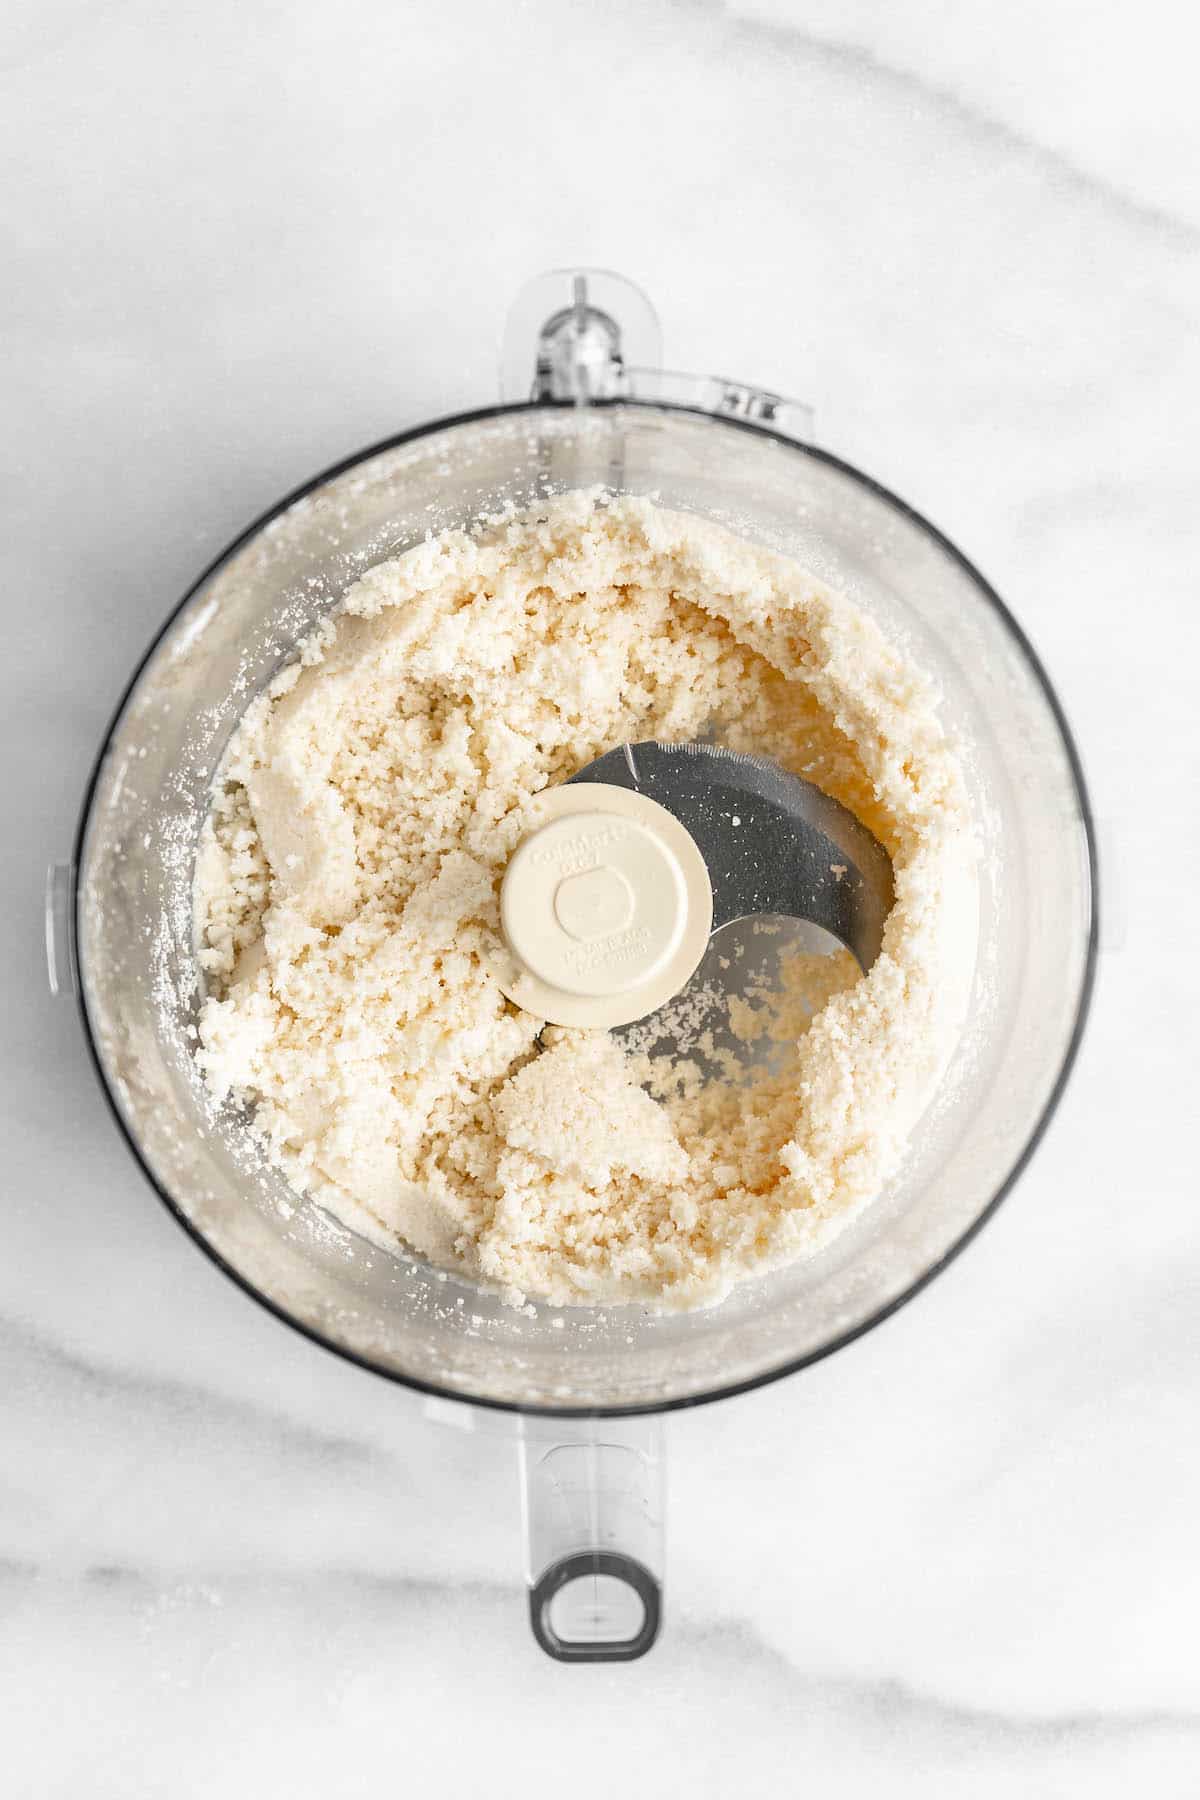 Overhead view of coconut flakes in food processor bowl after processing